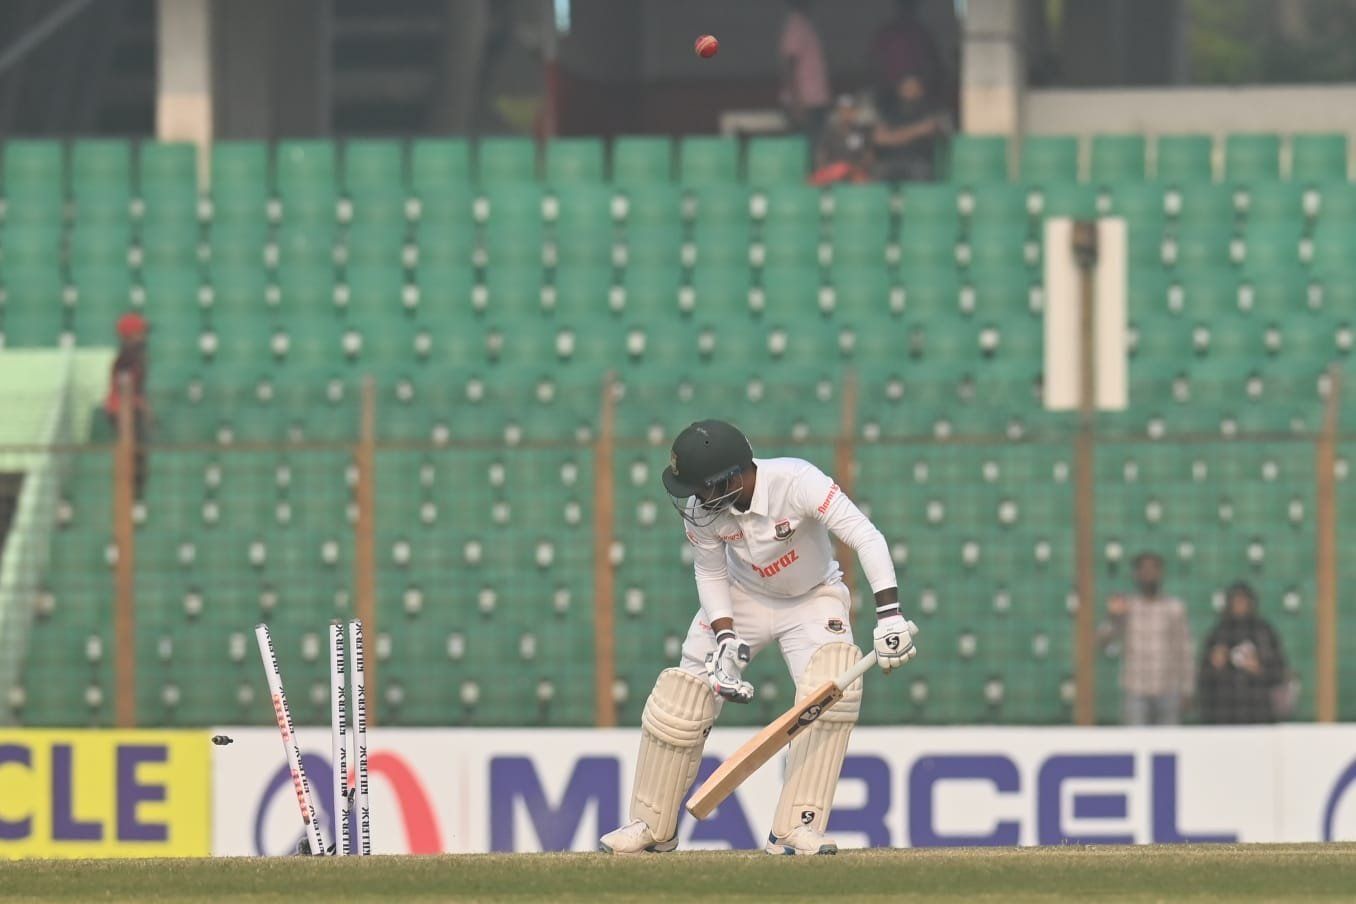 None of the Bangladesh batters put up a fight on Day 2 of the Chattogram Test. [P/C: Twitter]